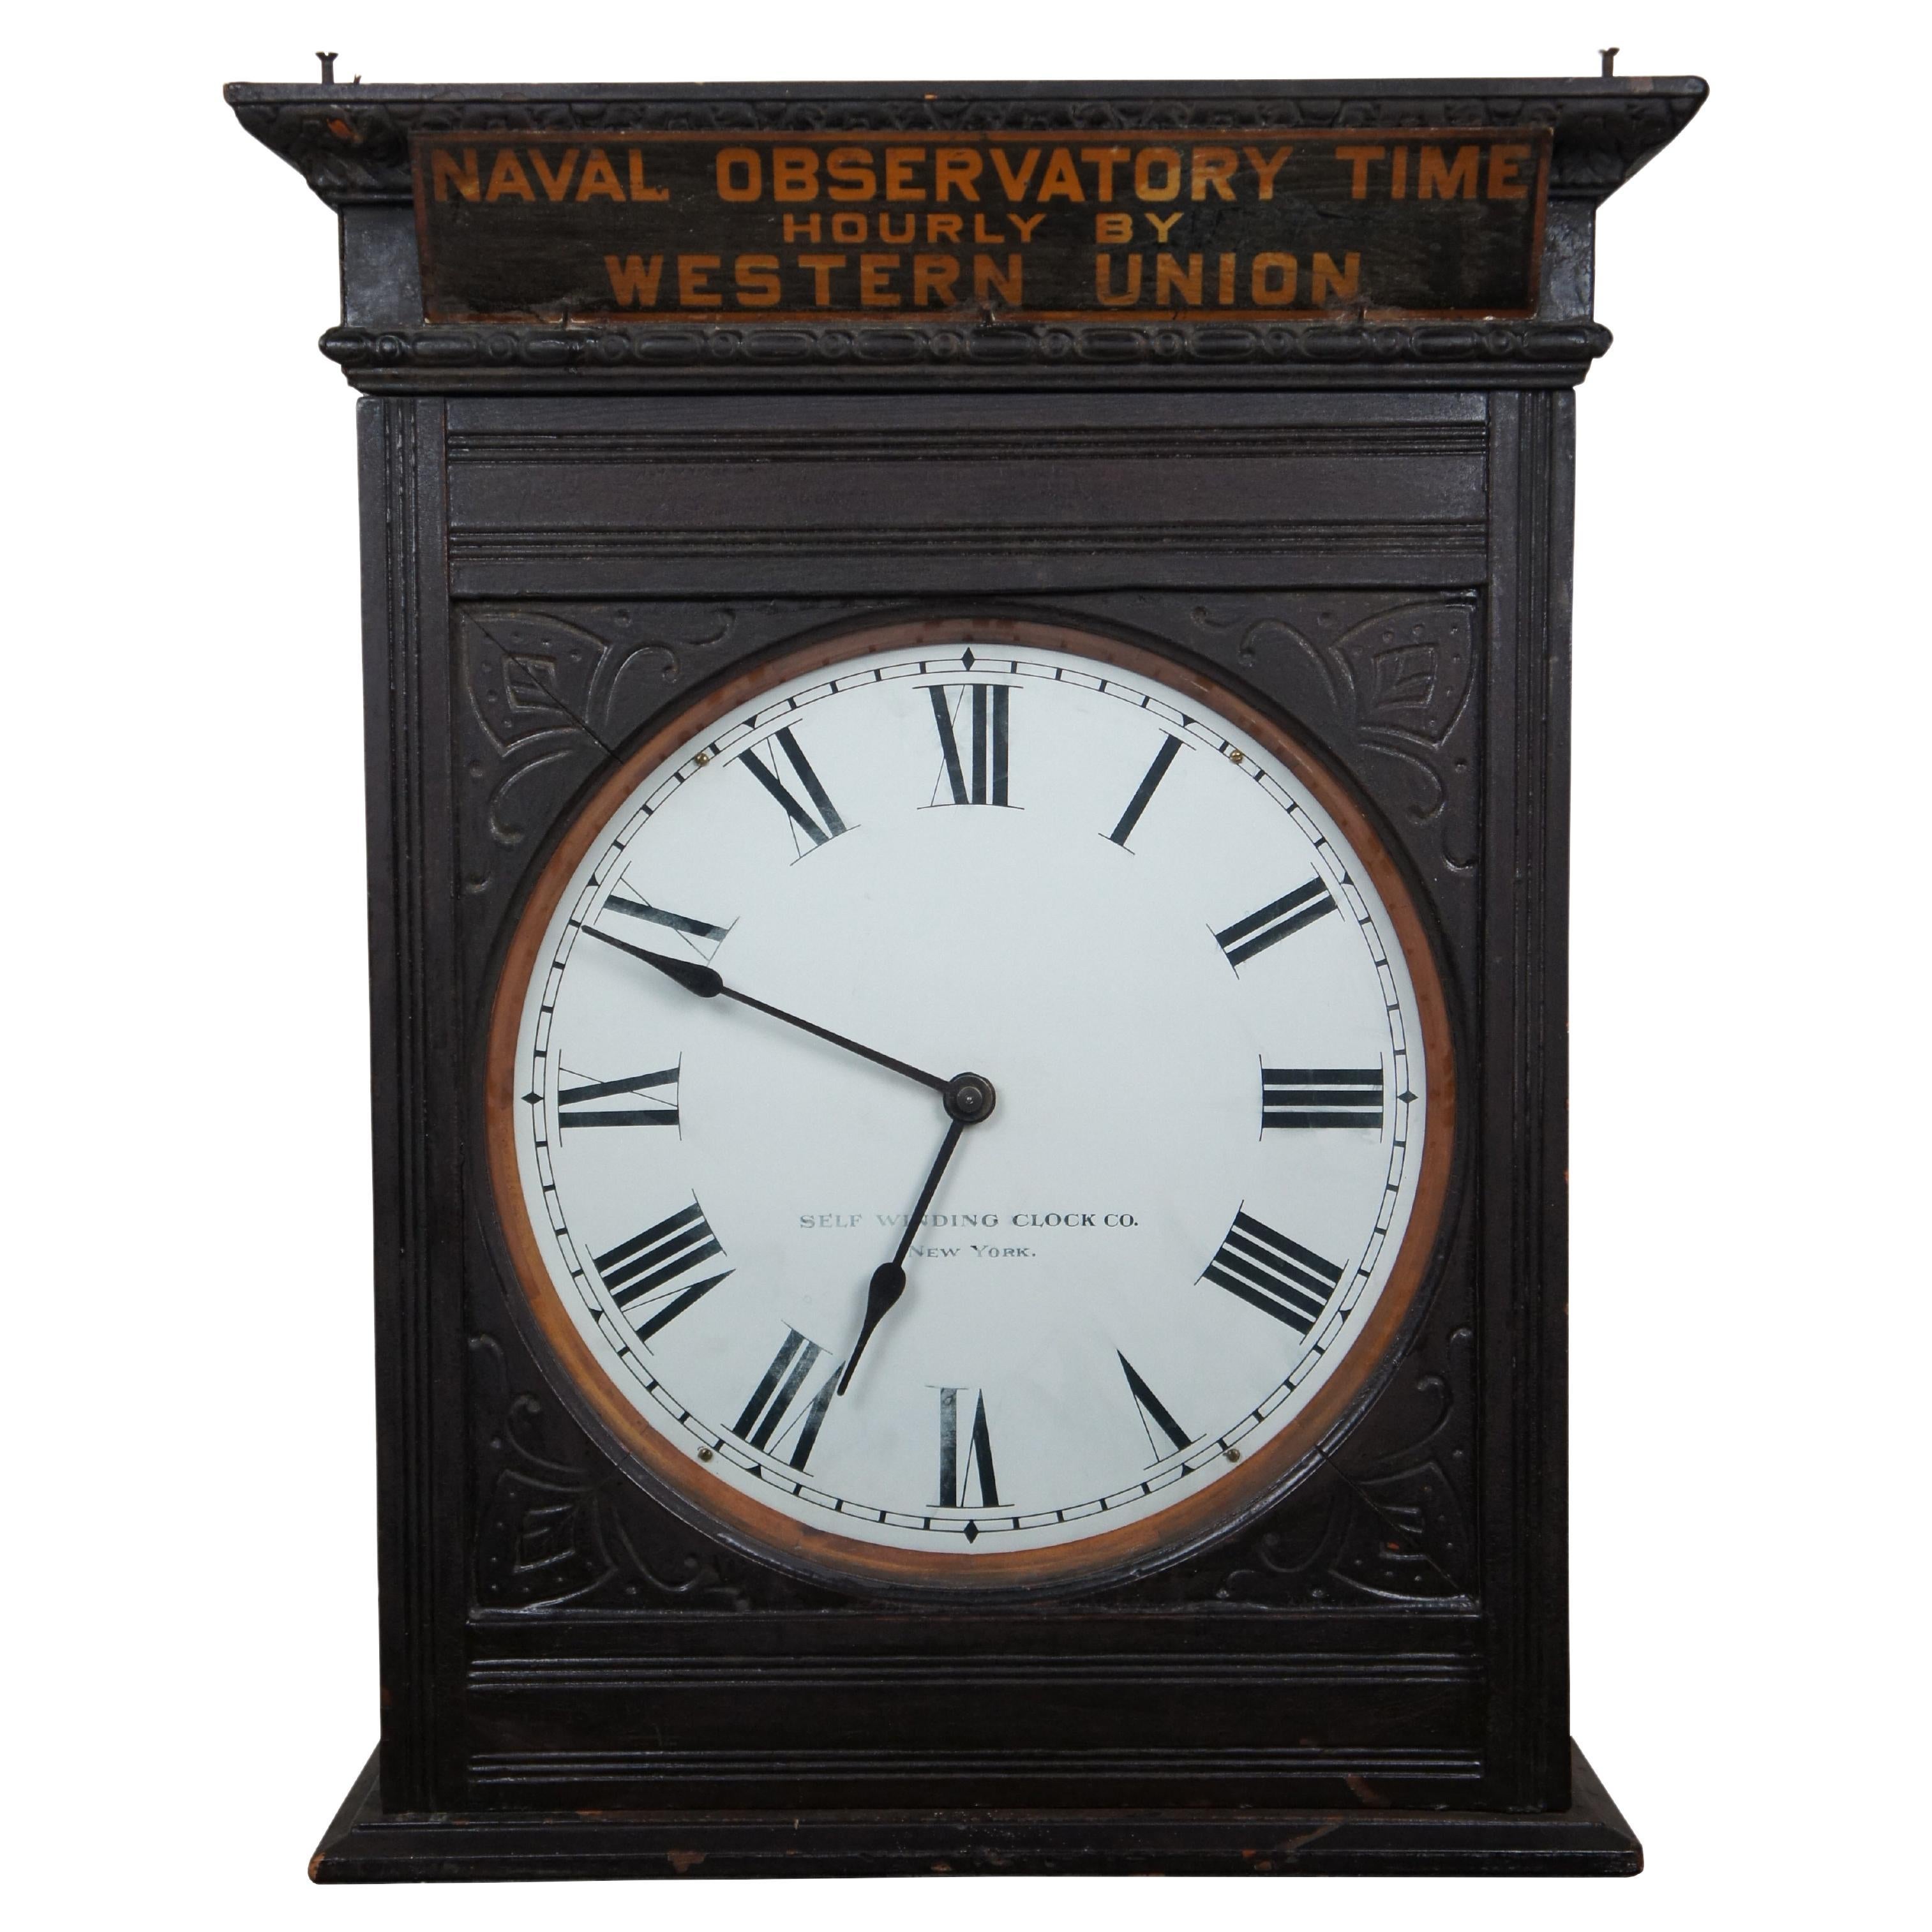 Rare Self Winding Clock Co Naval Observatory Time Western Union Wall Clock 26"